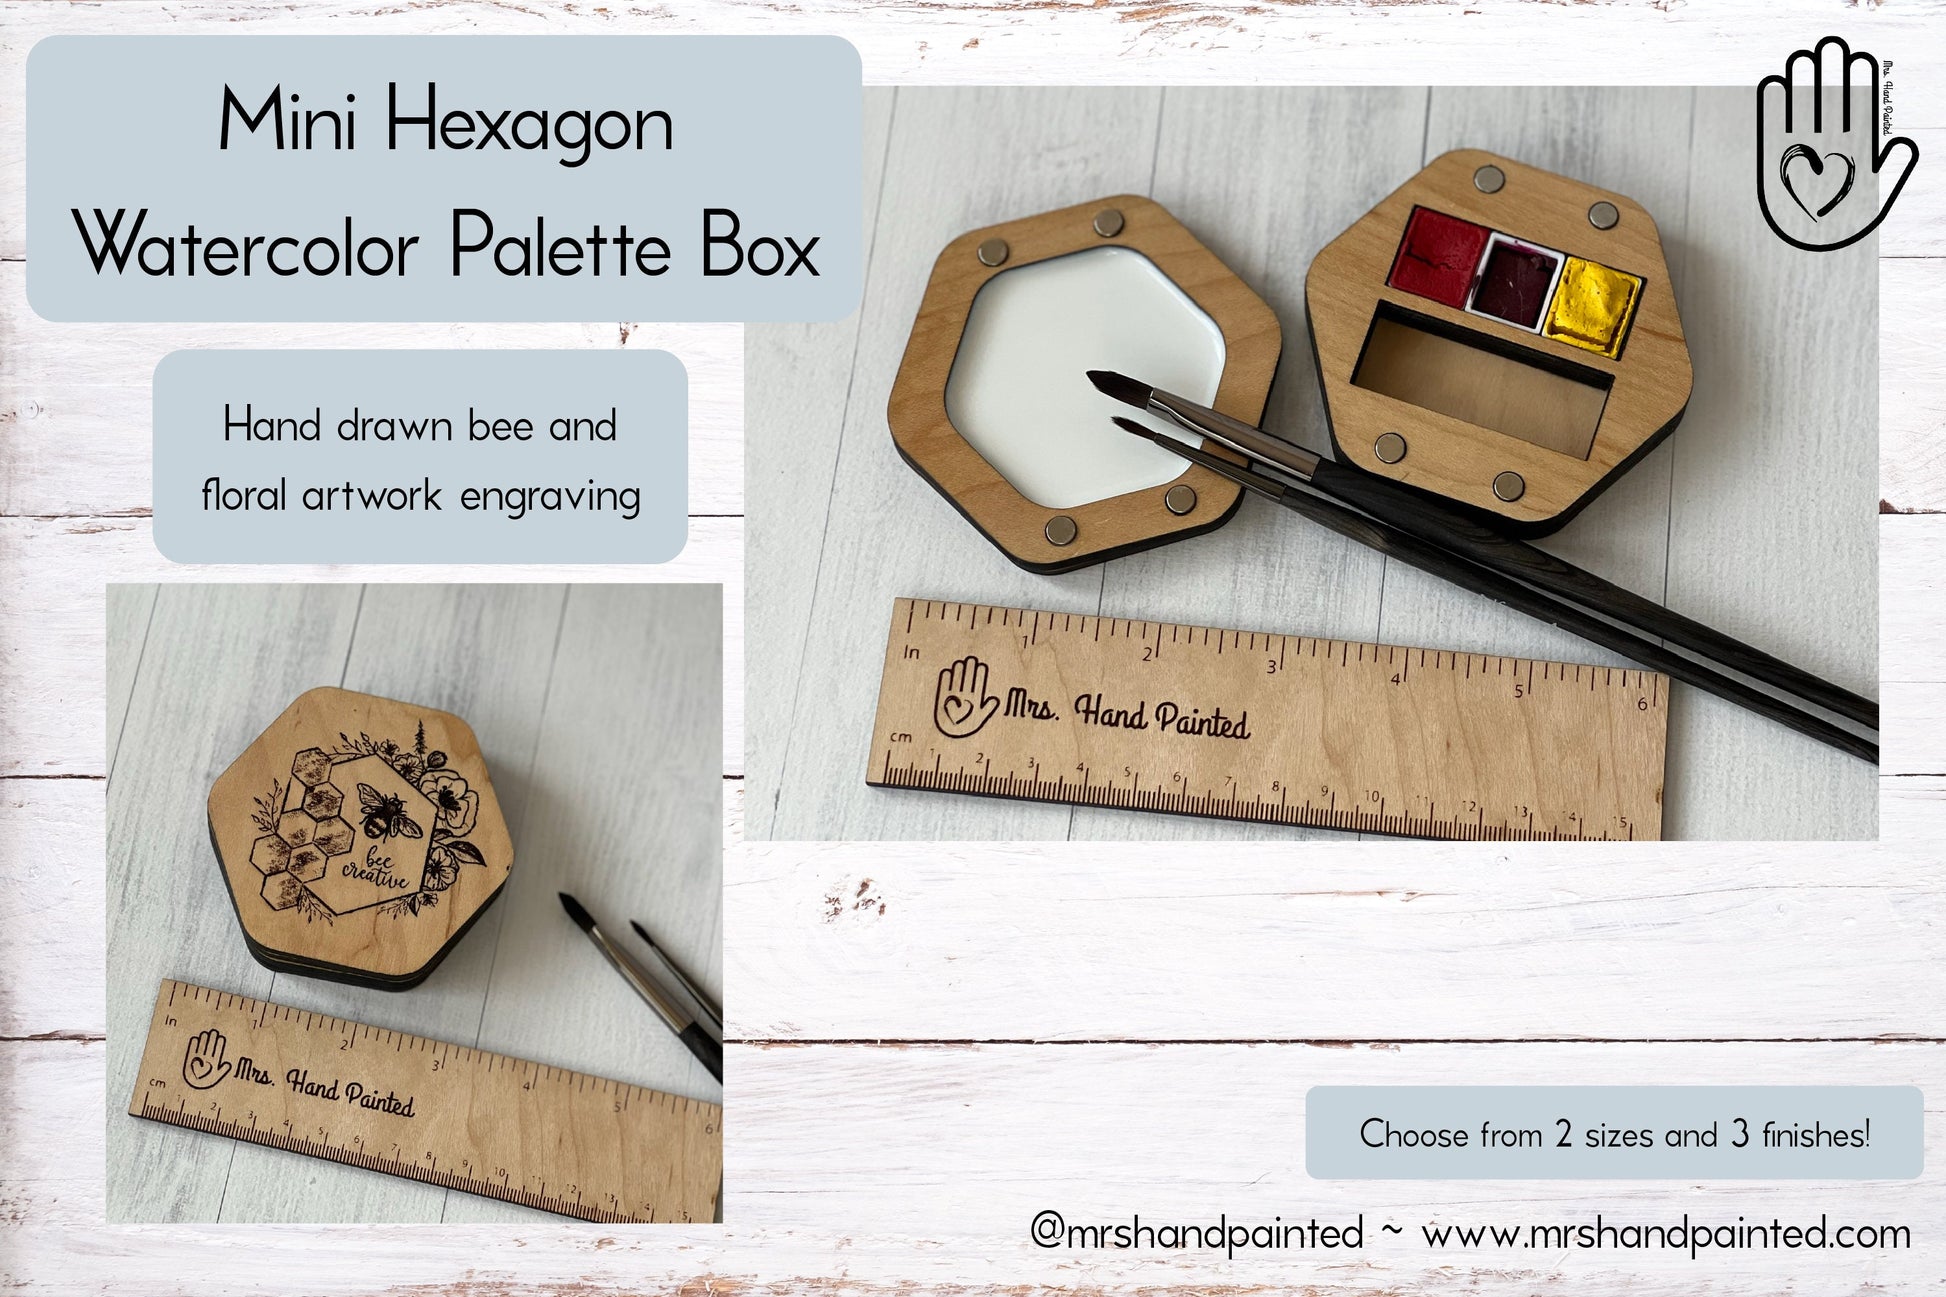 Mini Hexagon Wood Watercolor Palette - Custom Engraved with Hand